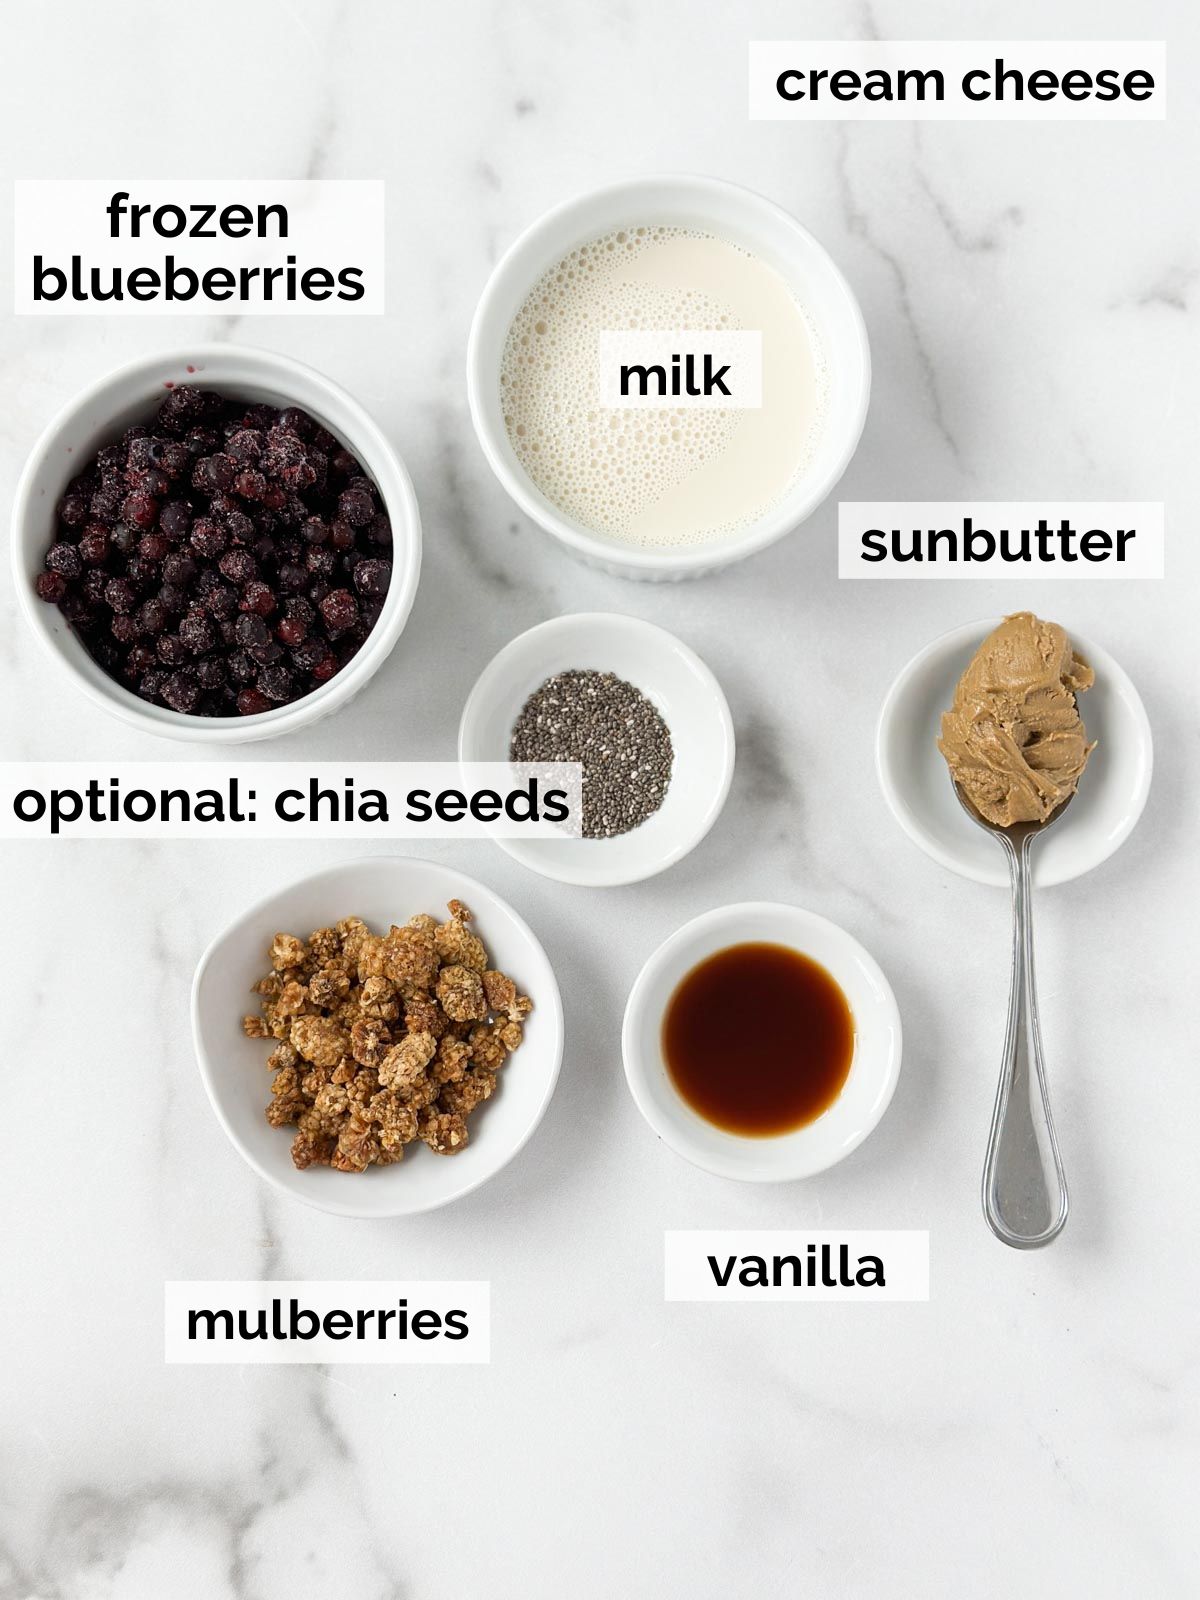 Ingredients for a blueberry smoothie with sunbutter.